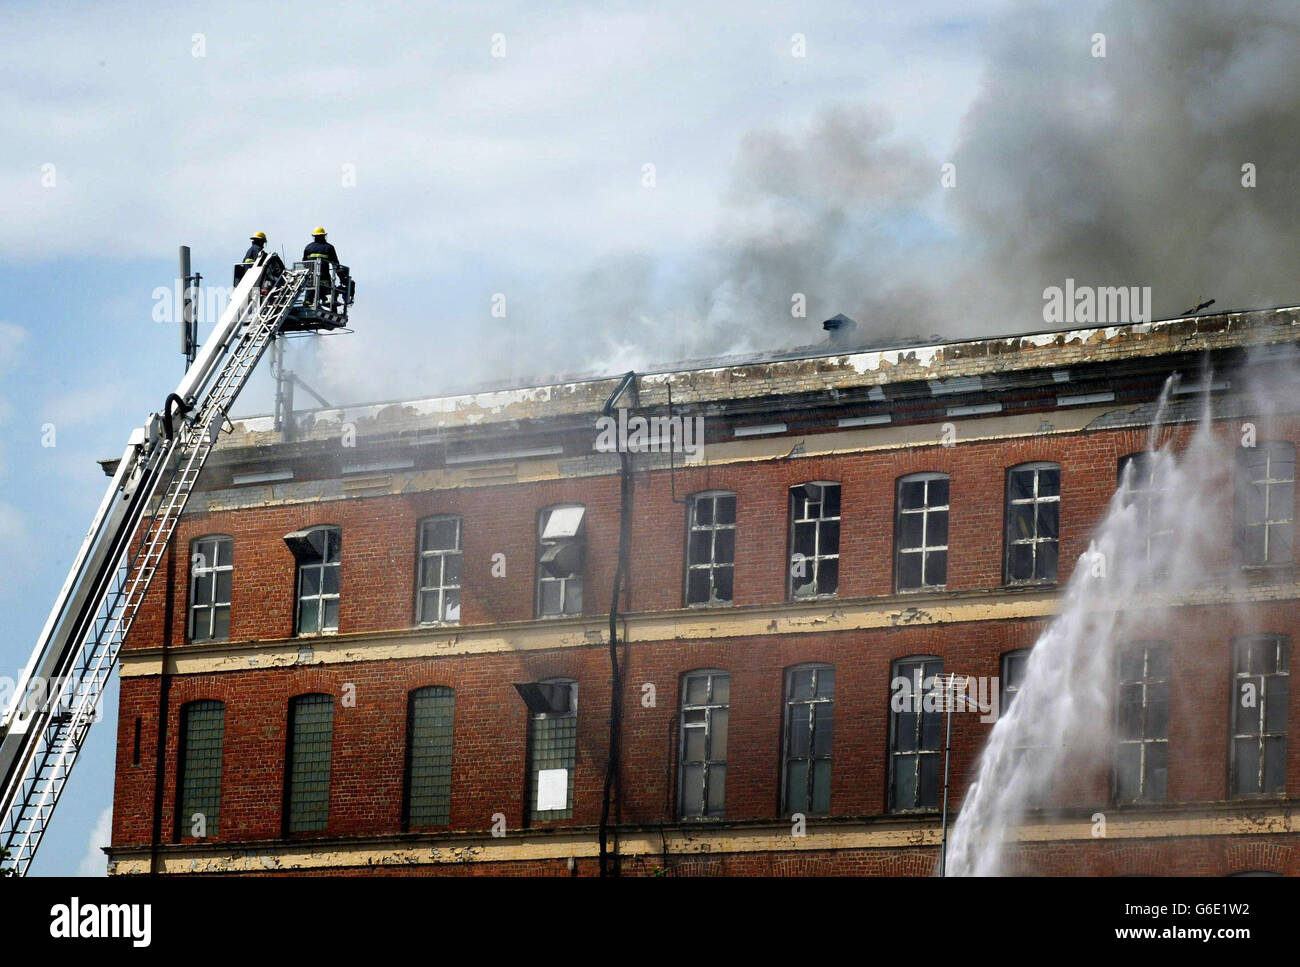 Fire crews tackle a blaze at an industrial complex in the north of Belfast. Premises in Edenderry Industrial Estate on Belfast's Crumlin Road were evacuated as firefighters dealt with the blaze. * Safety experts were expected to make an assessment of whether the old mill building, whose entire fourth floor was destroyed, should be demolished. Stock Photo